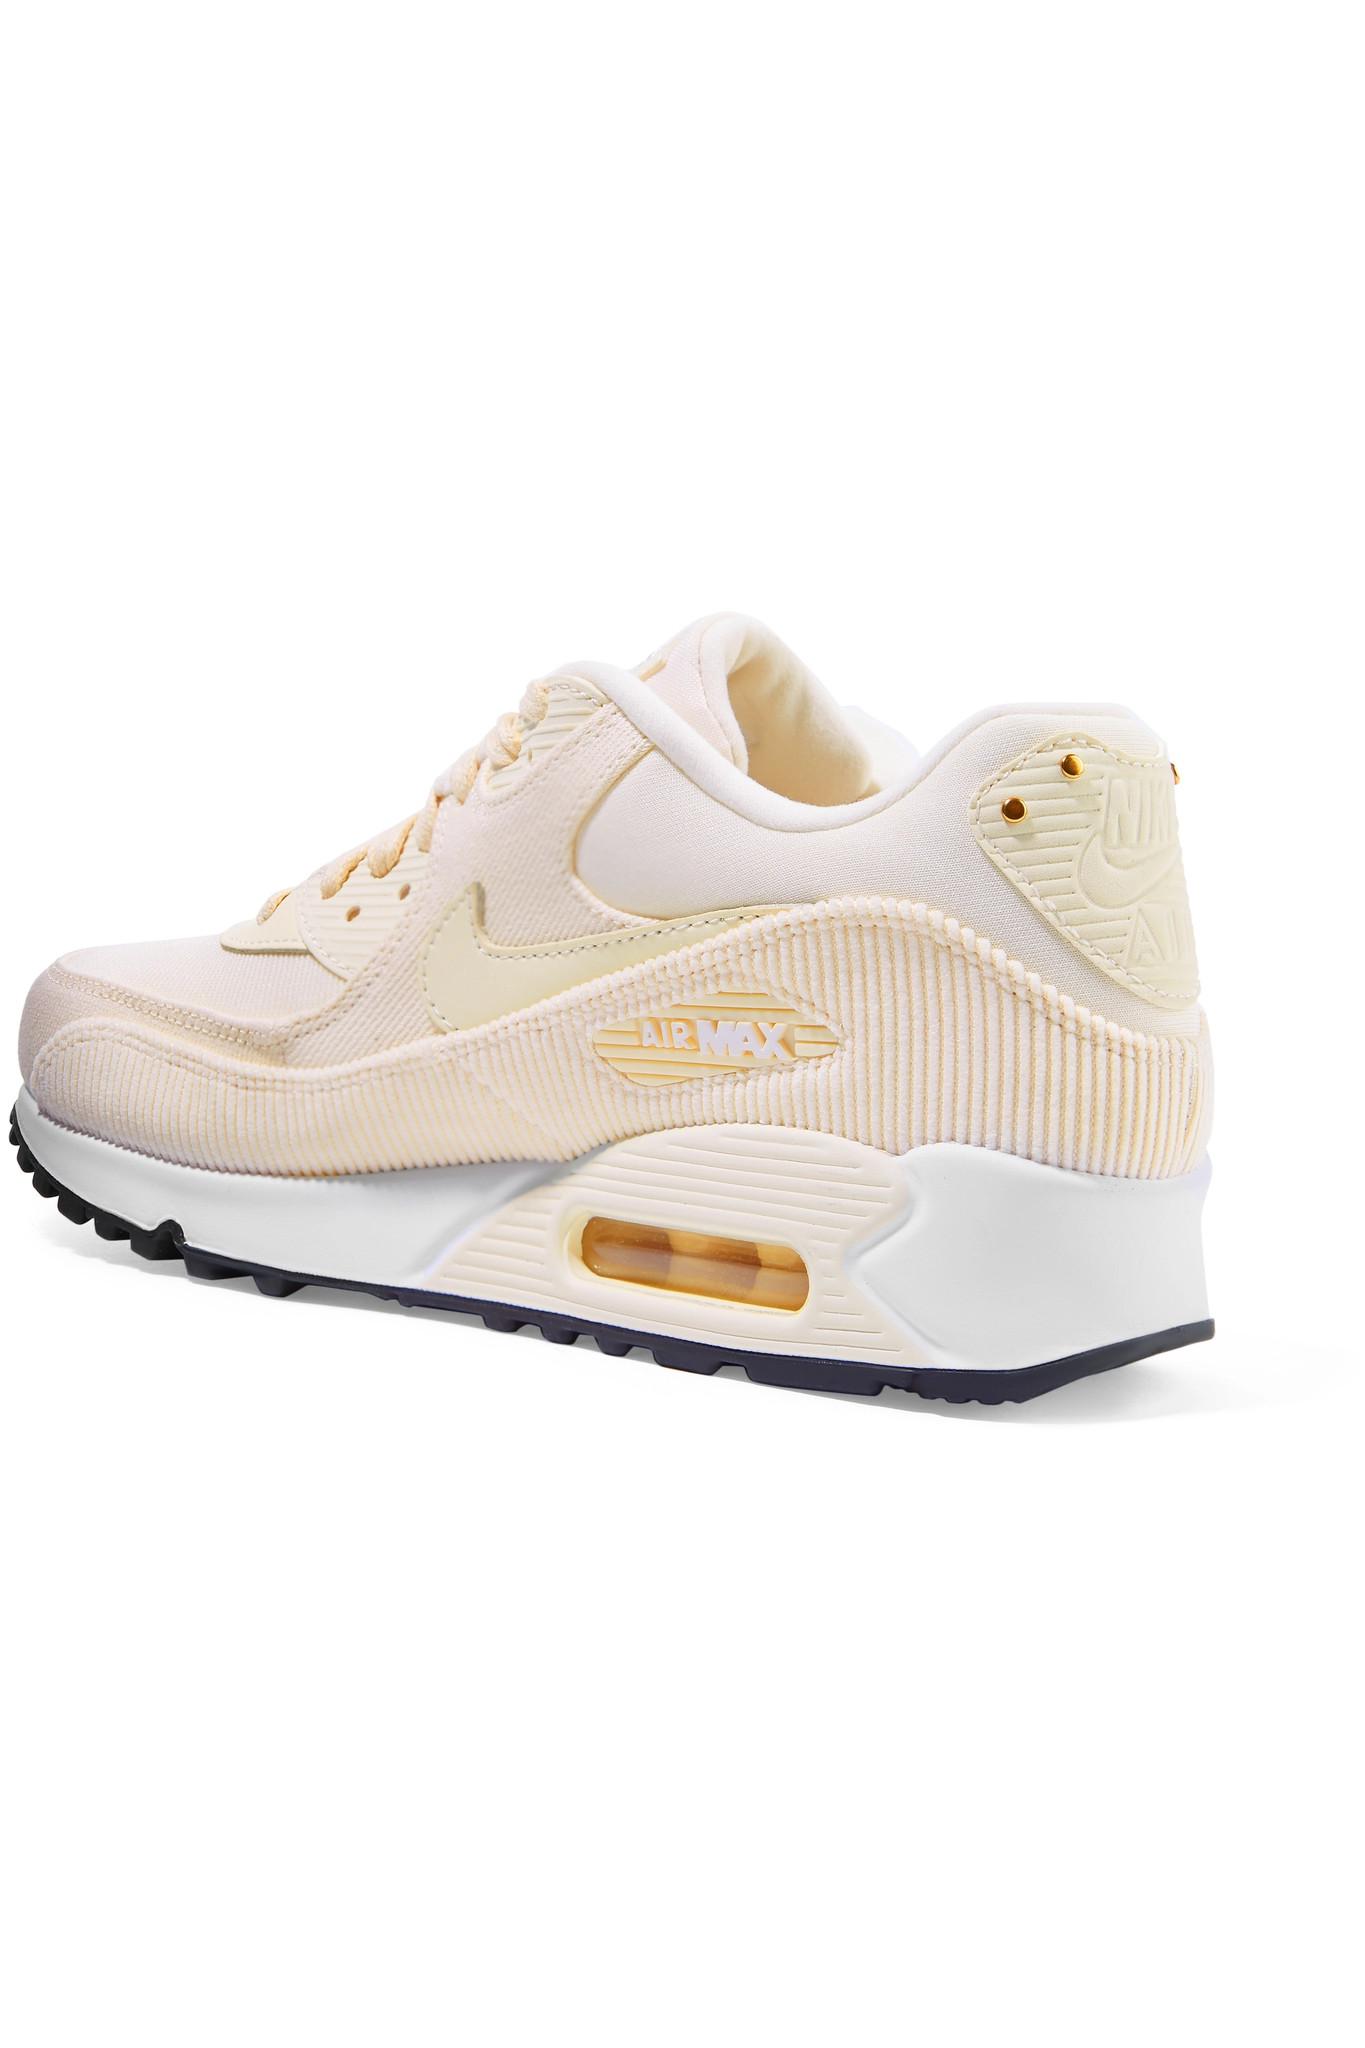 Nike Air Max 90 Leather, Corduroy And Mesh Sneakers | Lyst